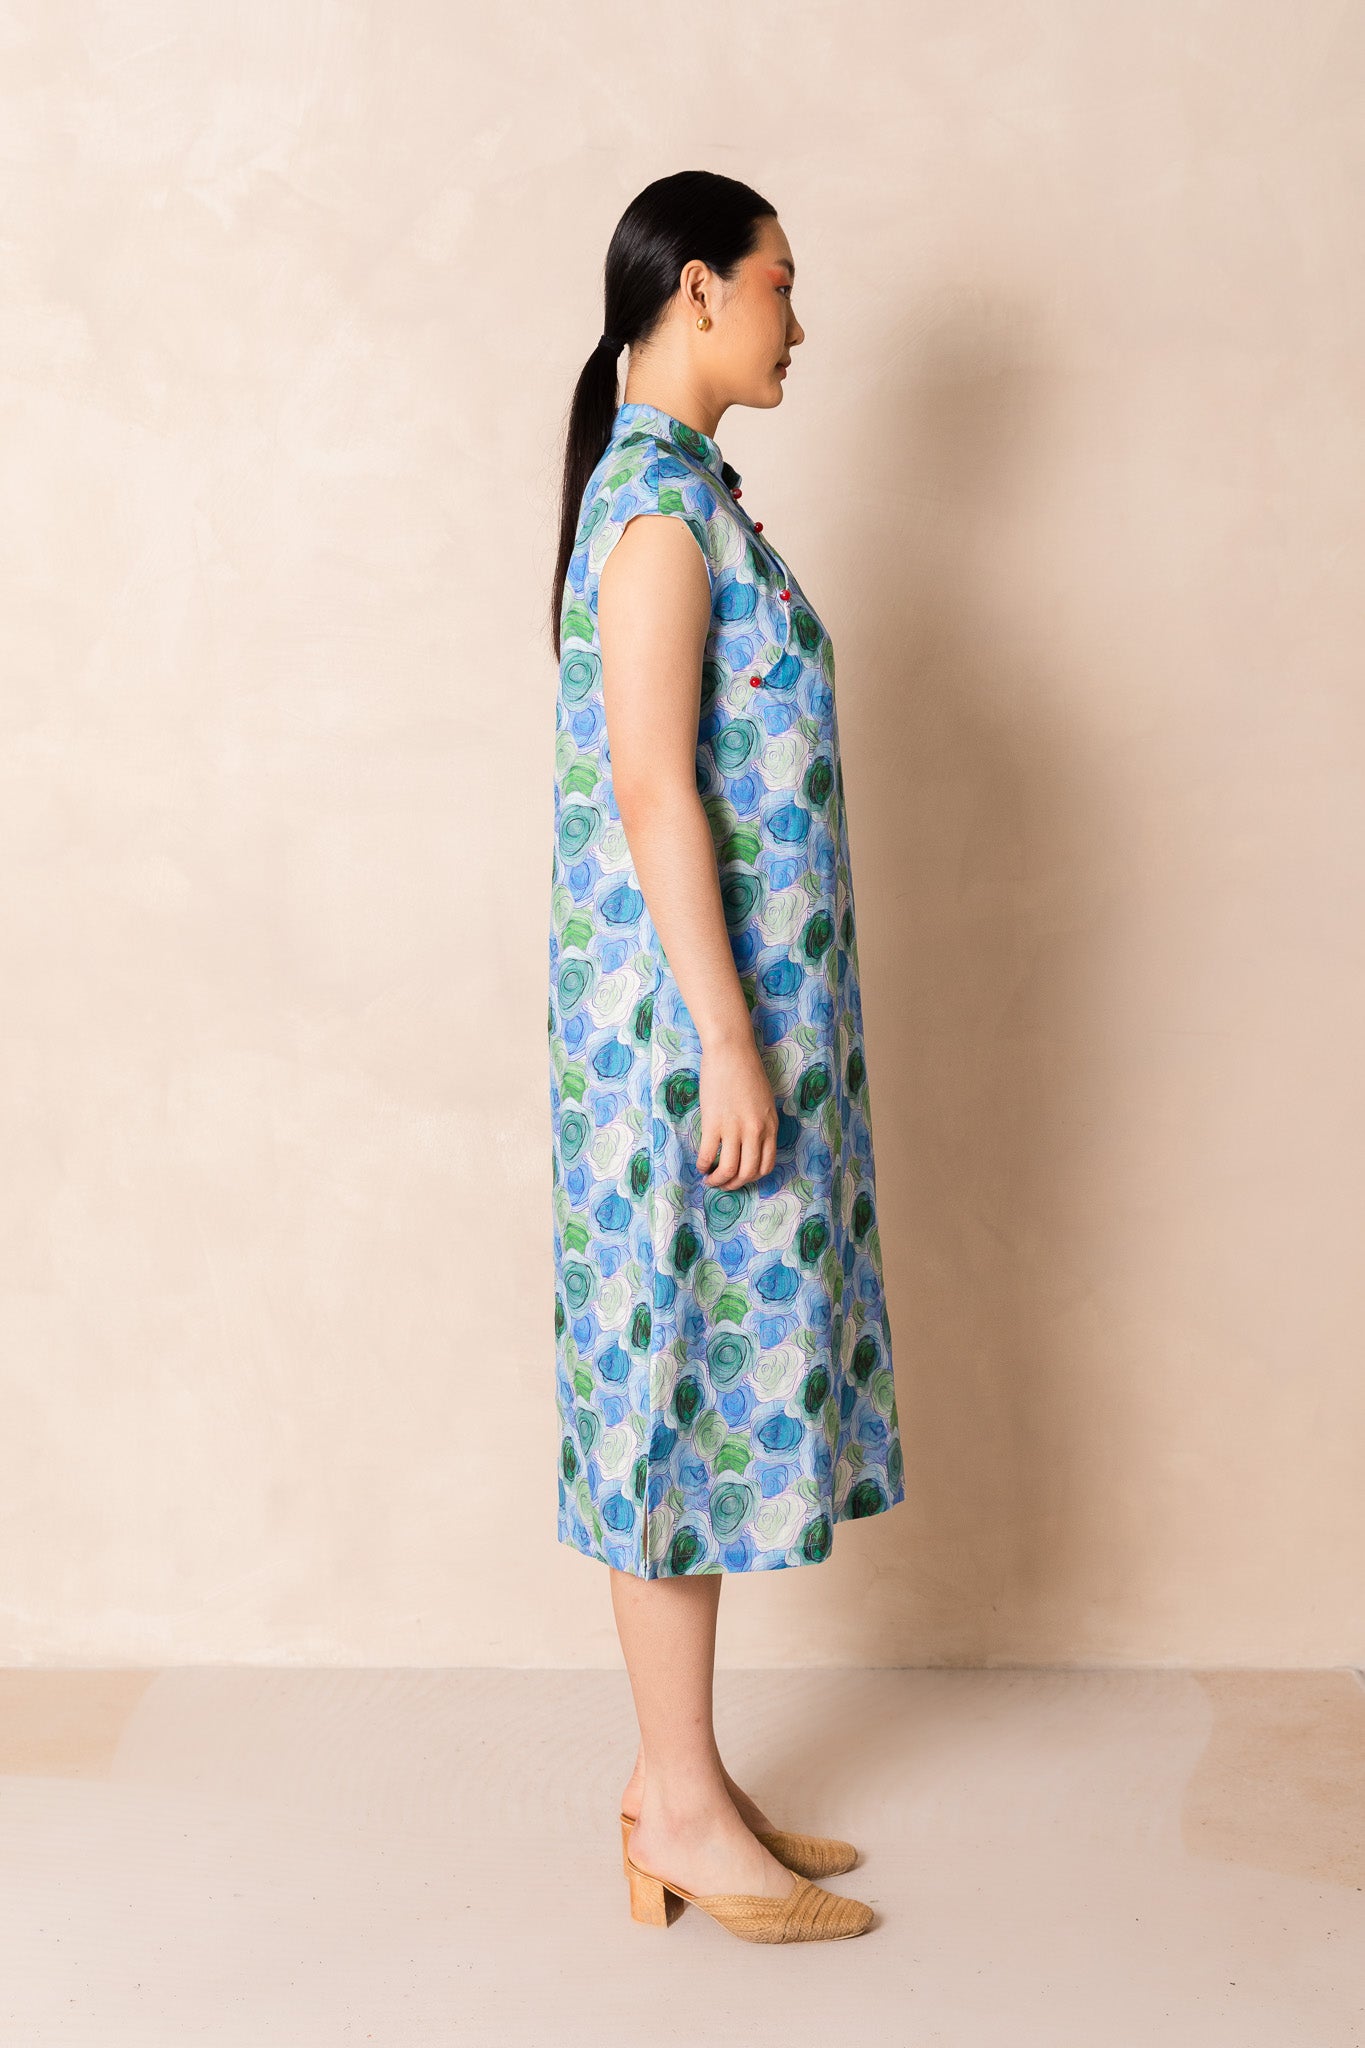 Water Colour Blue Rose Print Cap Sleeve Cheongsam Dress, available on You Living